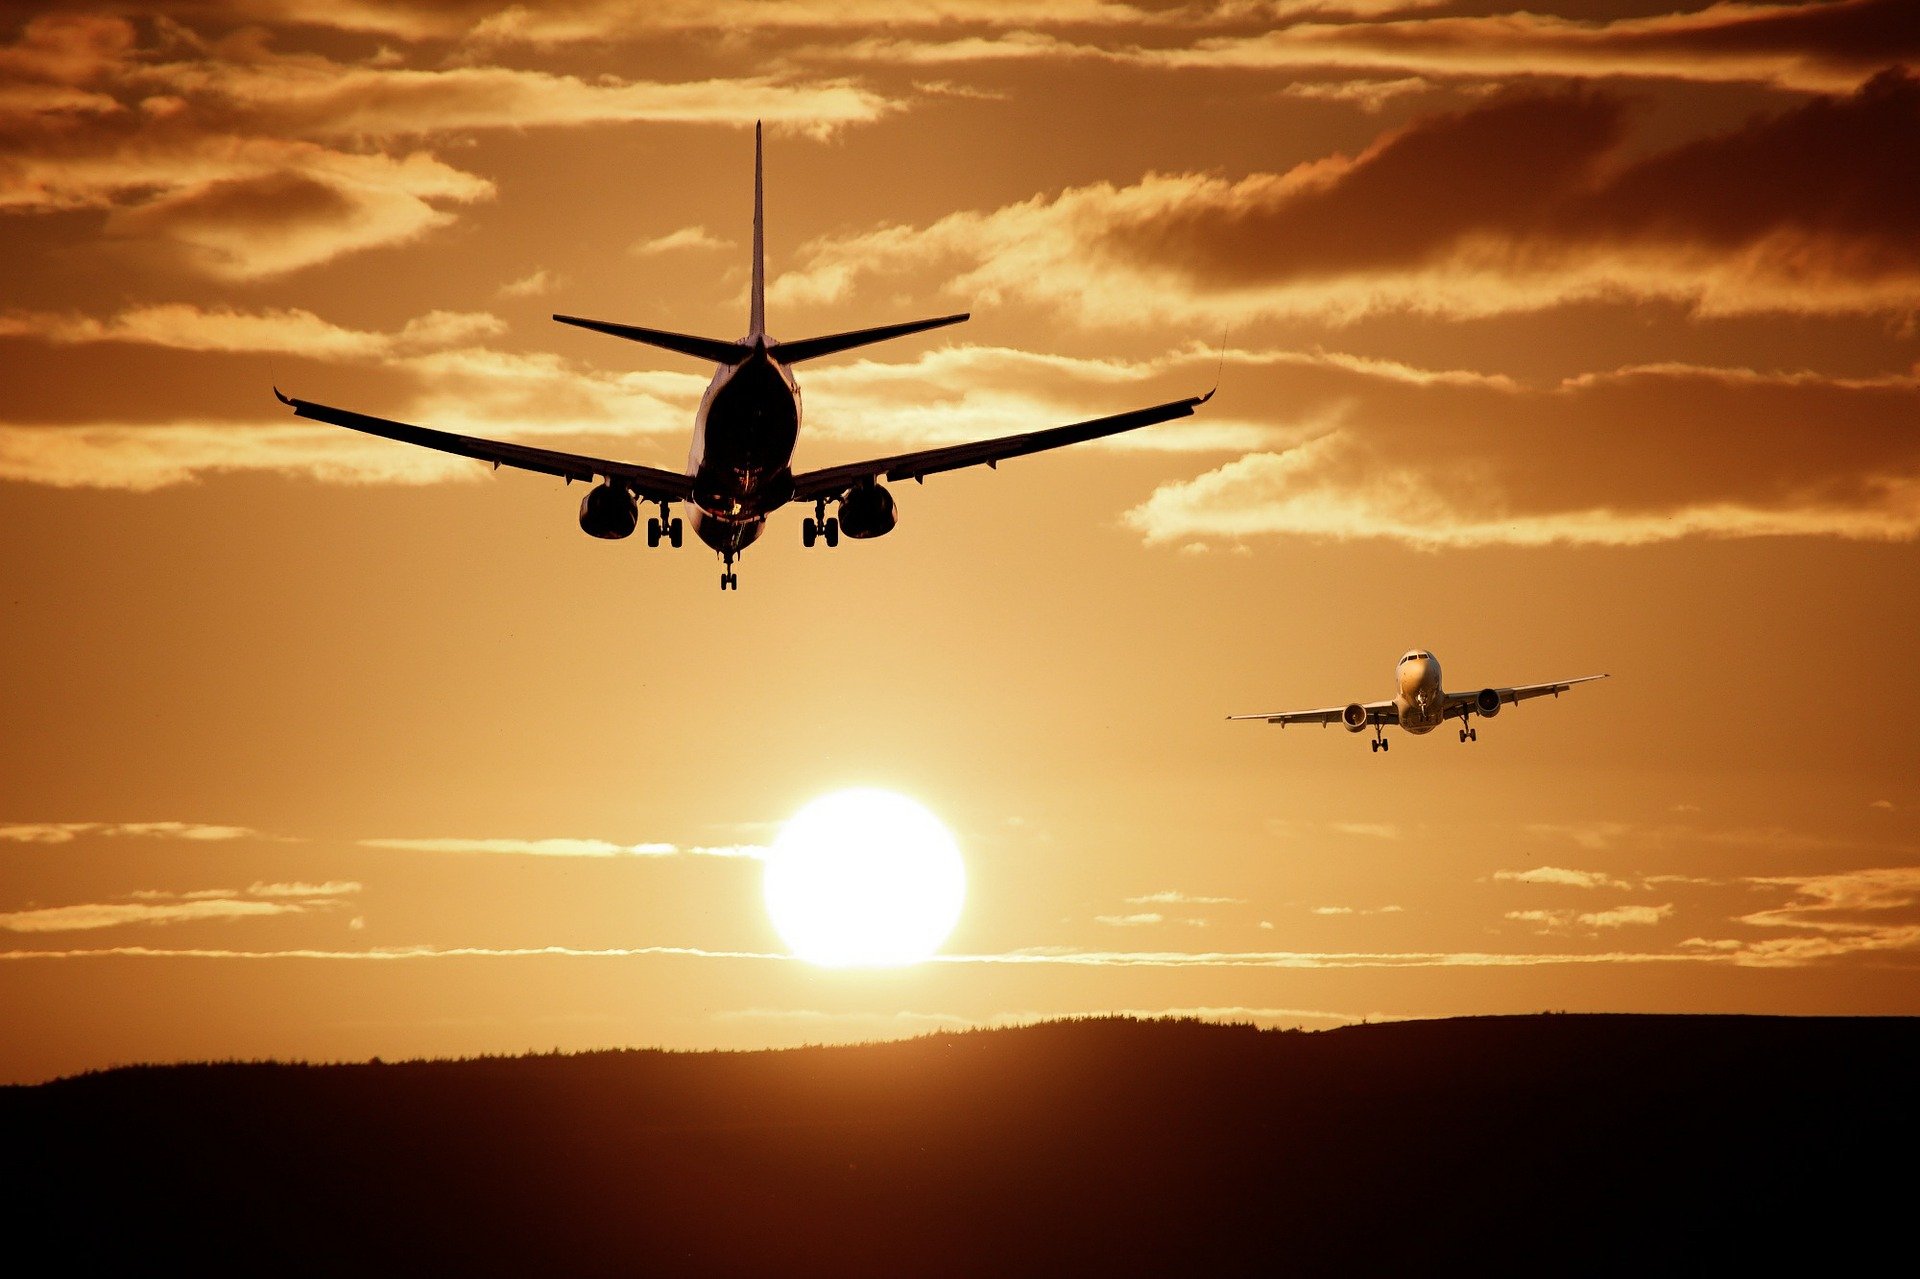 Are emissions trading schemes the answer to manage aviation's climate impact?